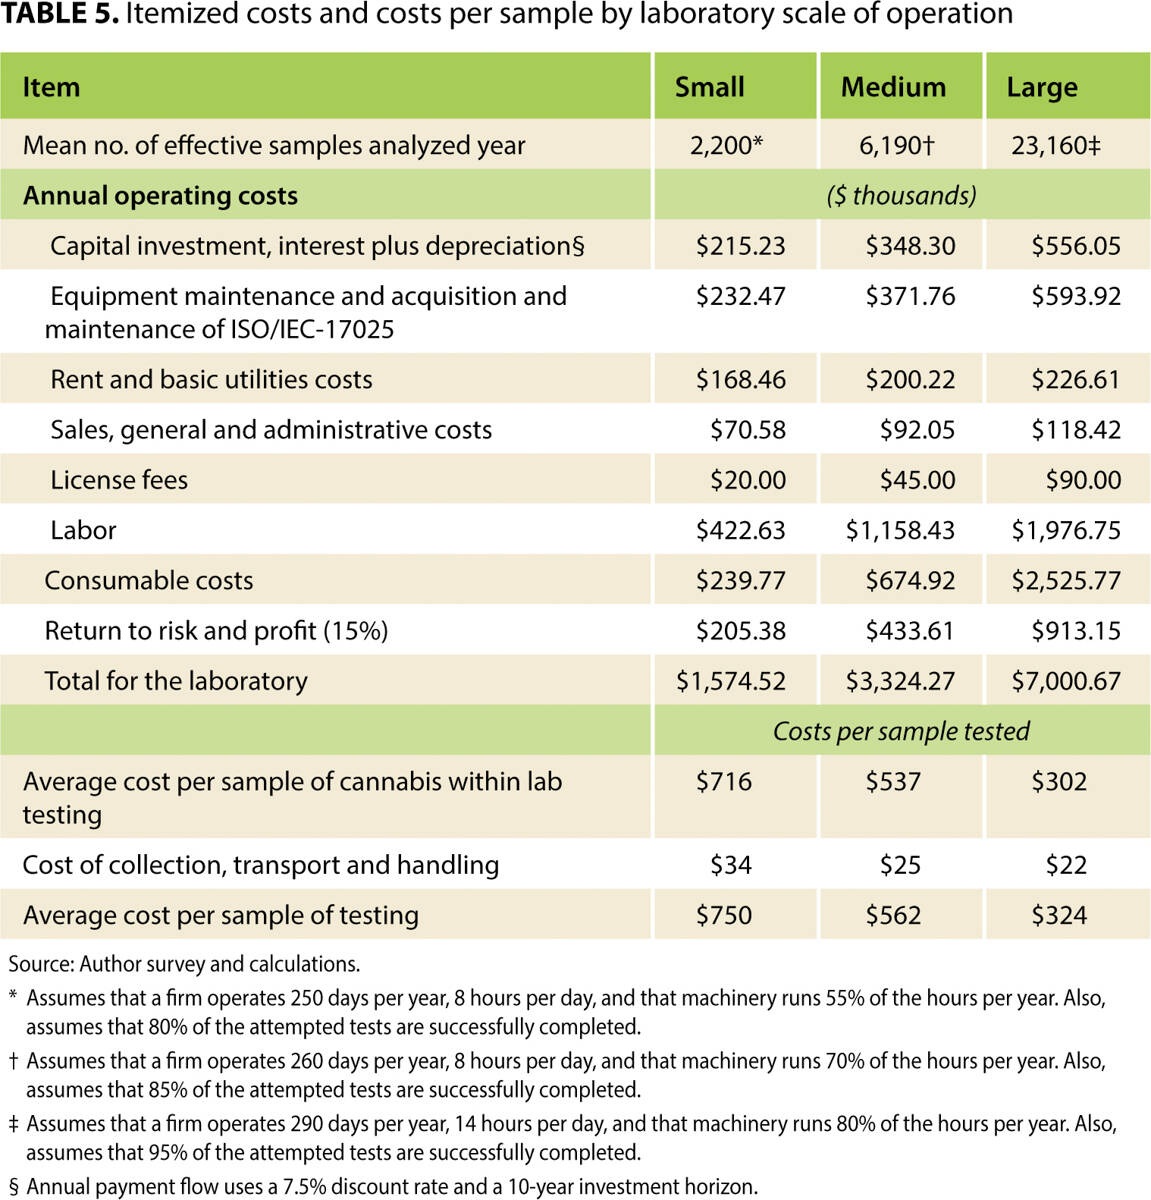 Itemized costs and costs per sample by laboratory scale of operation